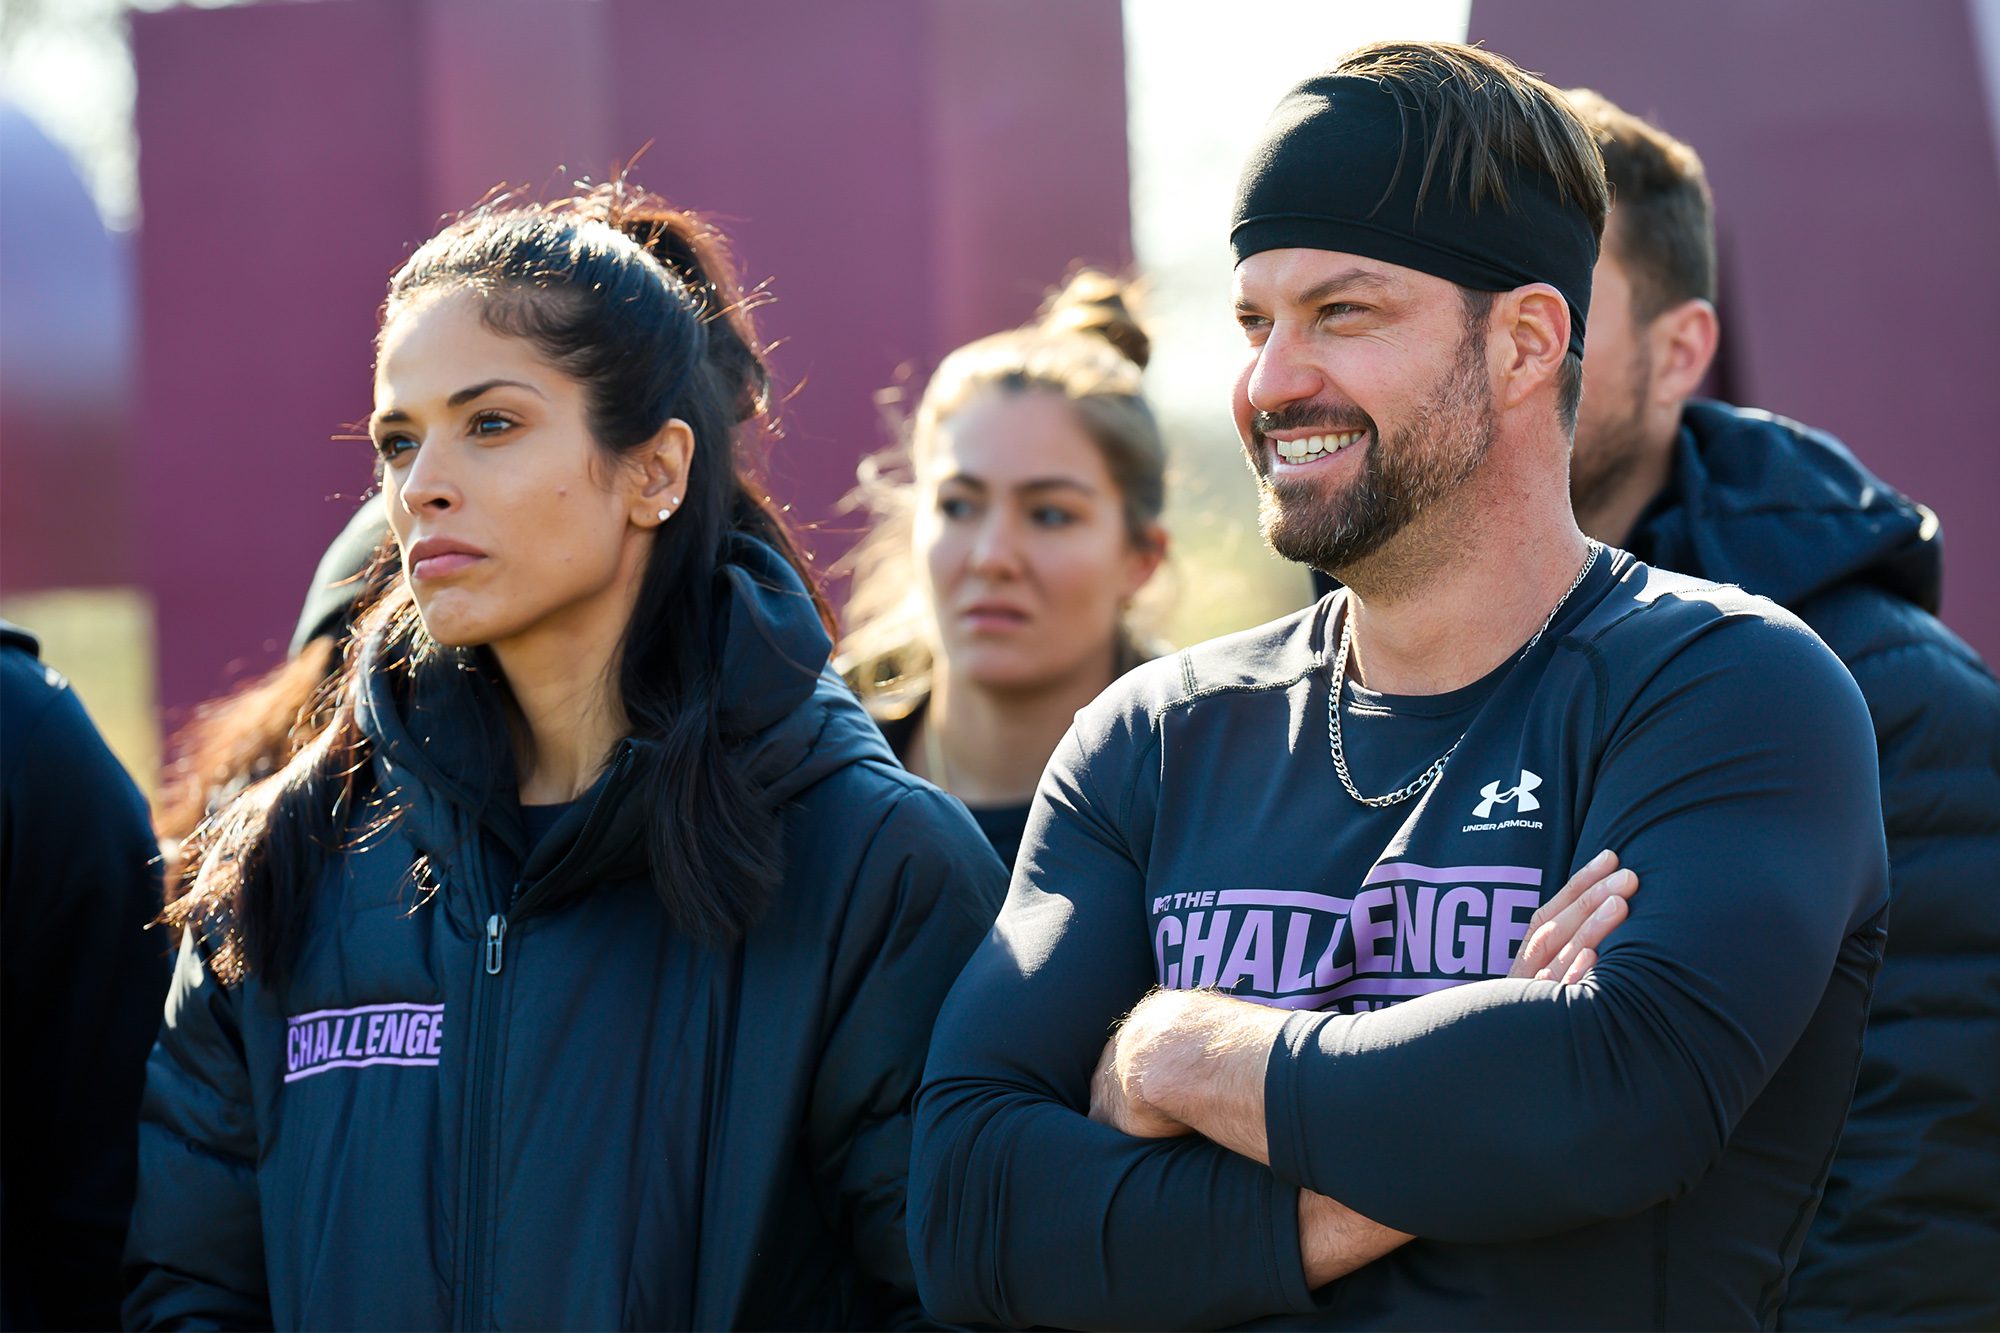 The Challenge Season 38 Episode 5: Release Date, Preview & Streaming Guide